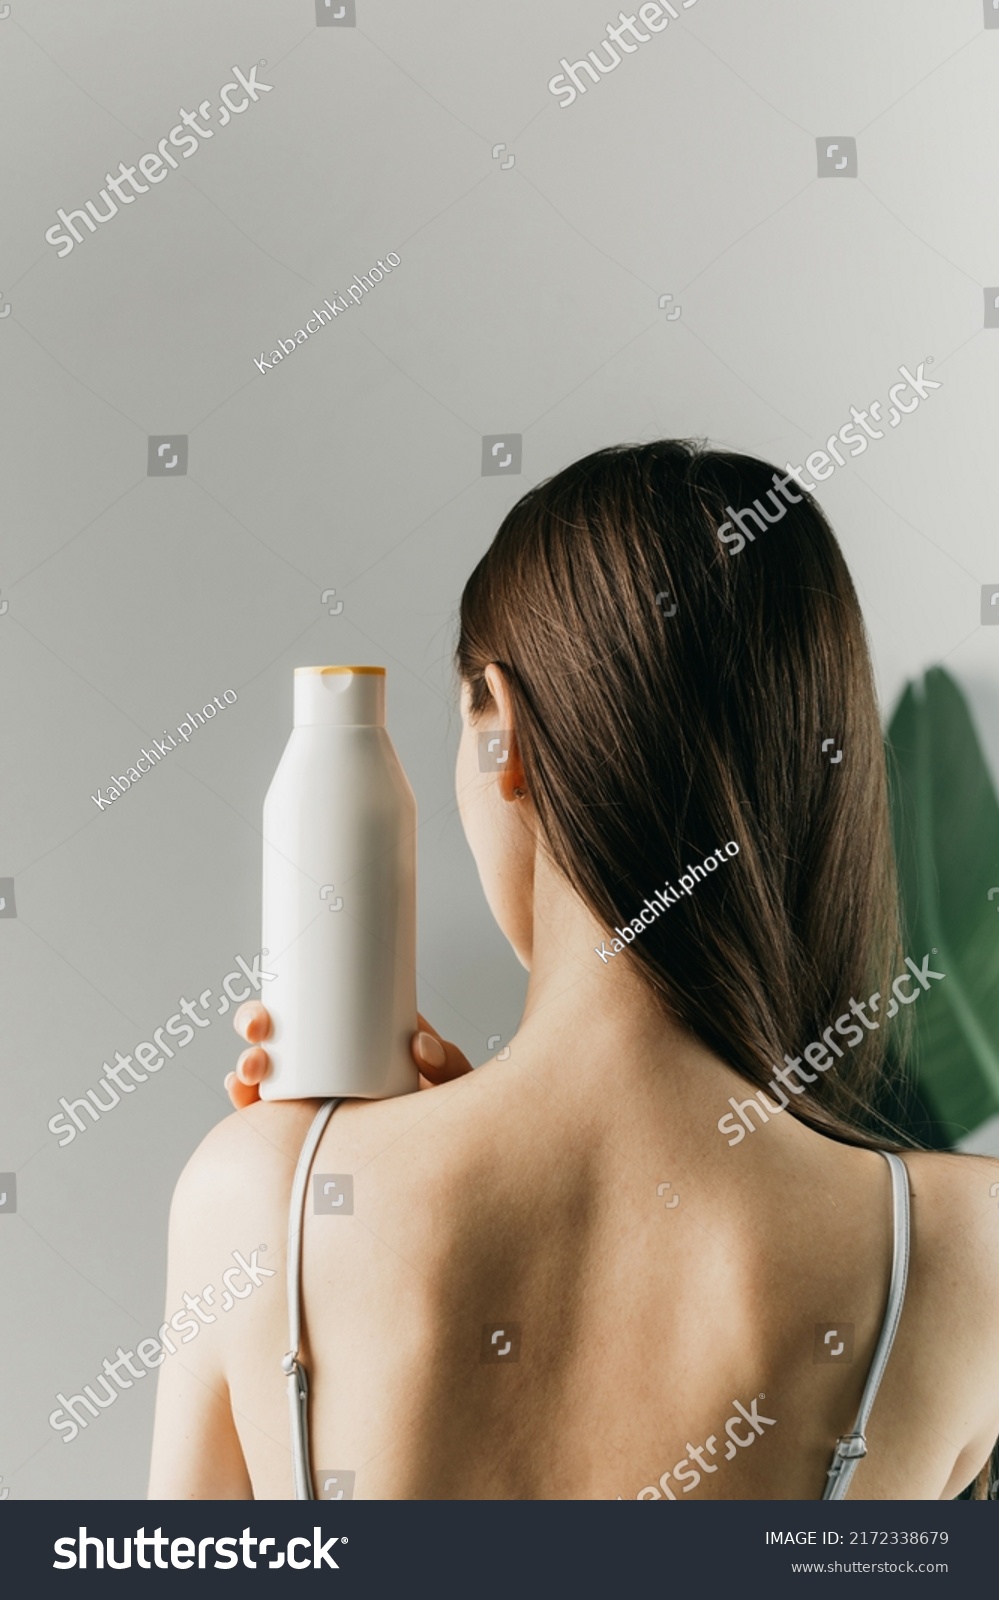 Woman holds a white bottle of cosmetics in her hand, standing with her back to the camera. Mock up shampoo, gel. #2172338679